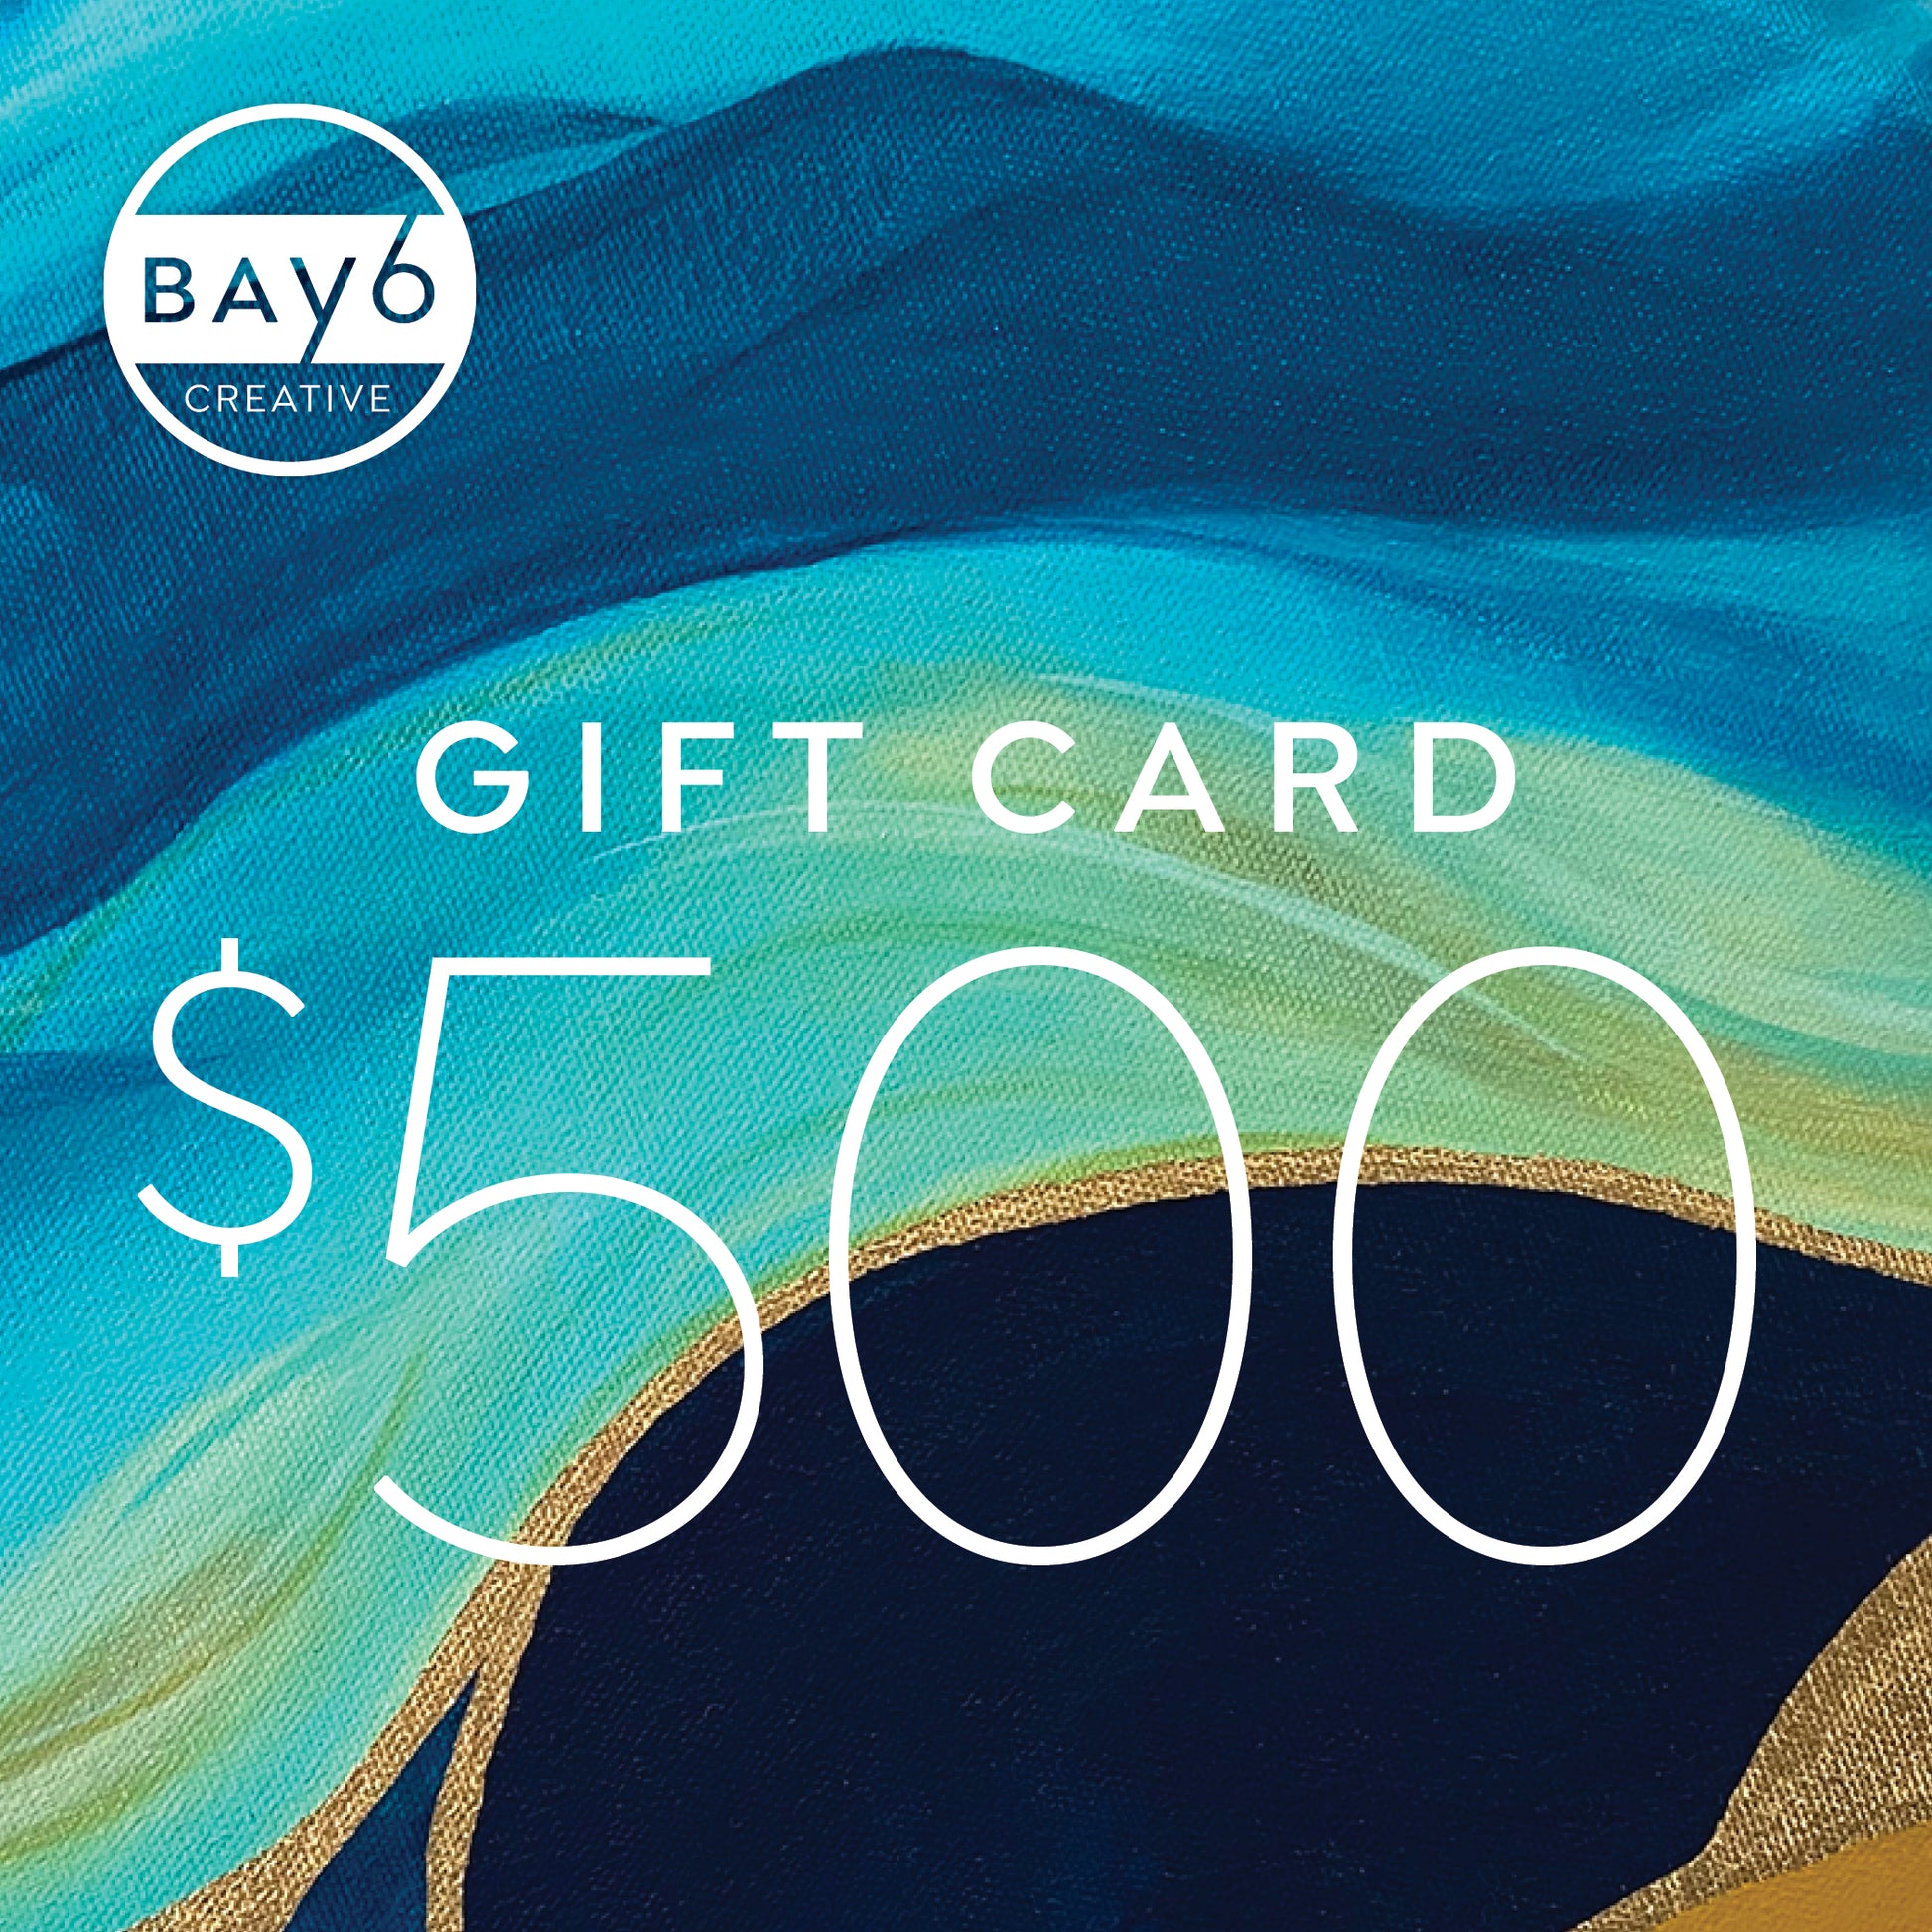 Give a $500 bay6creative gift card redeemable for exciting abstract artwork right here in our online store